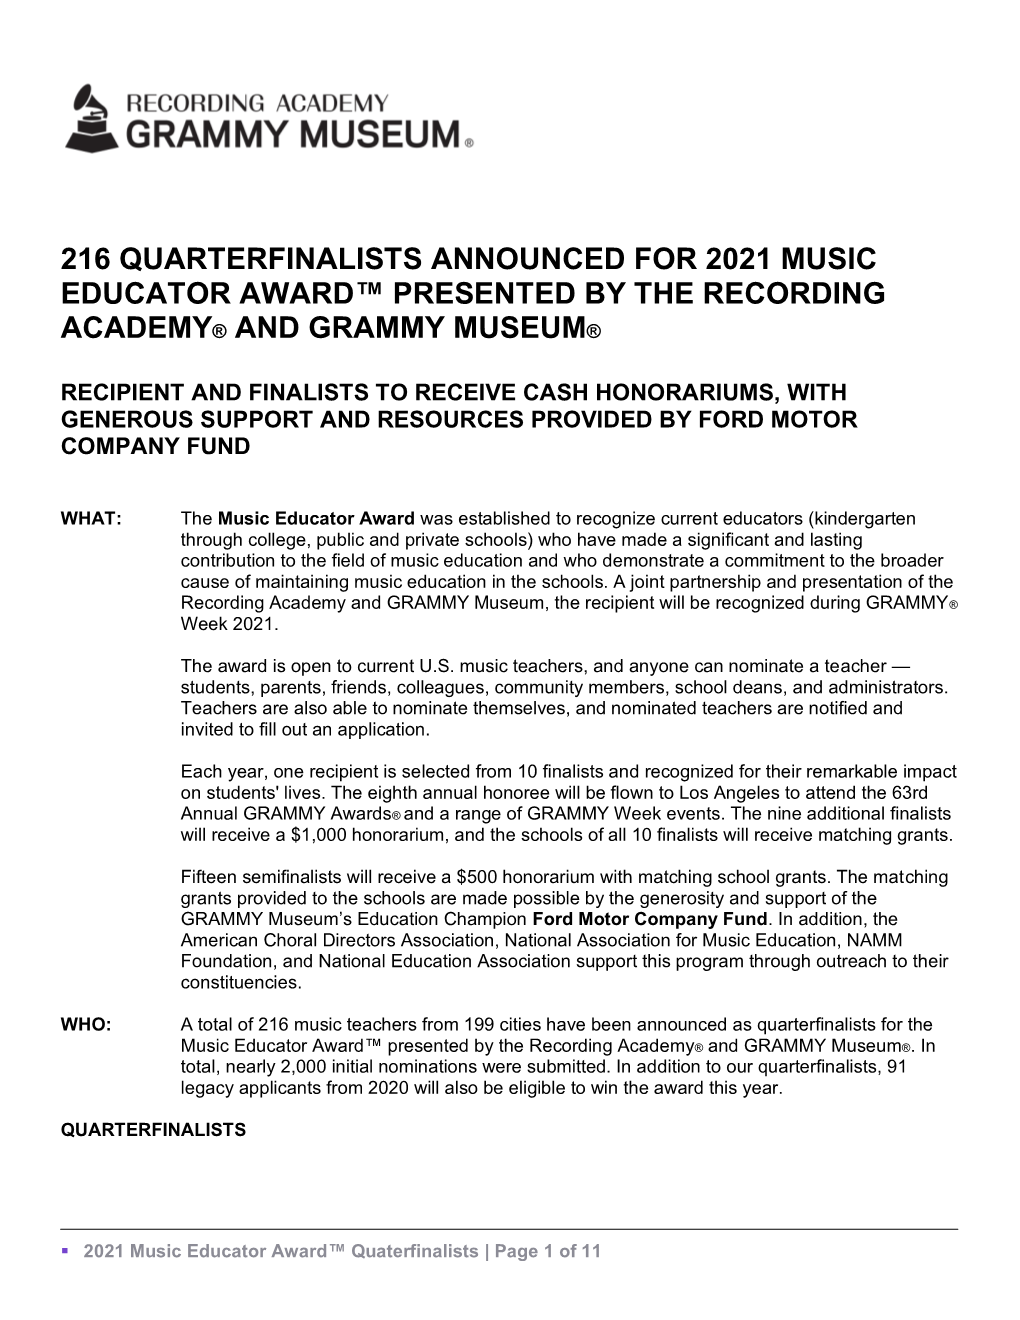 216 Quarterfinalists Announced for 2021 Music Educator a Ard Presented B the Recording Academy® and Grammy Museum®